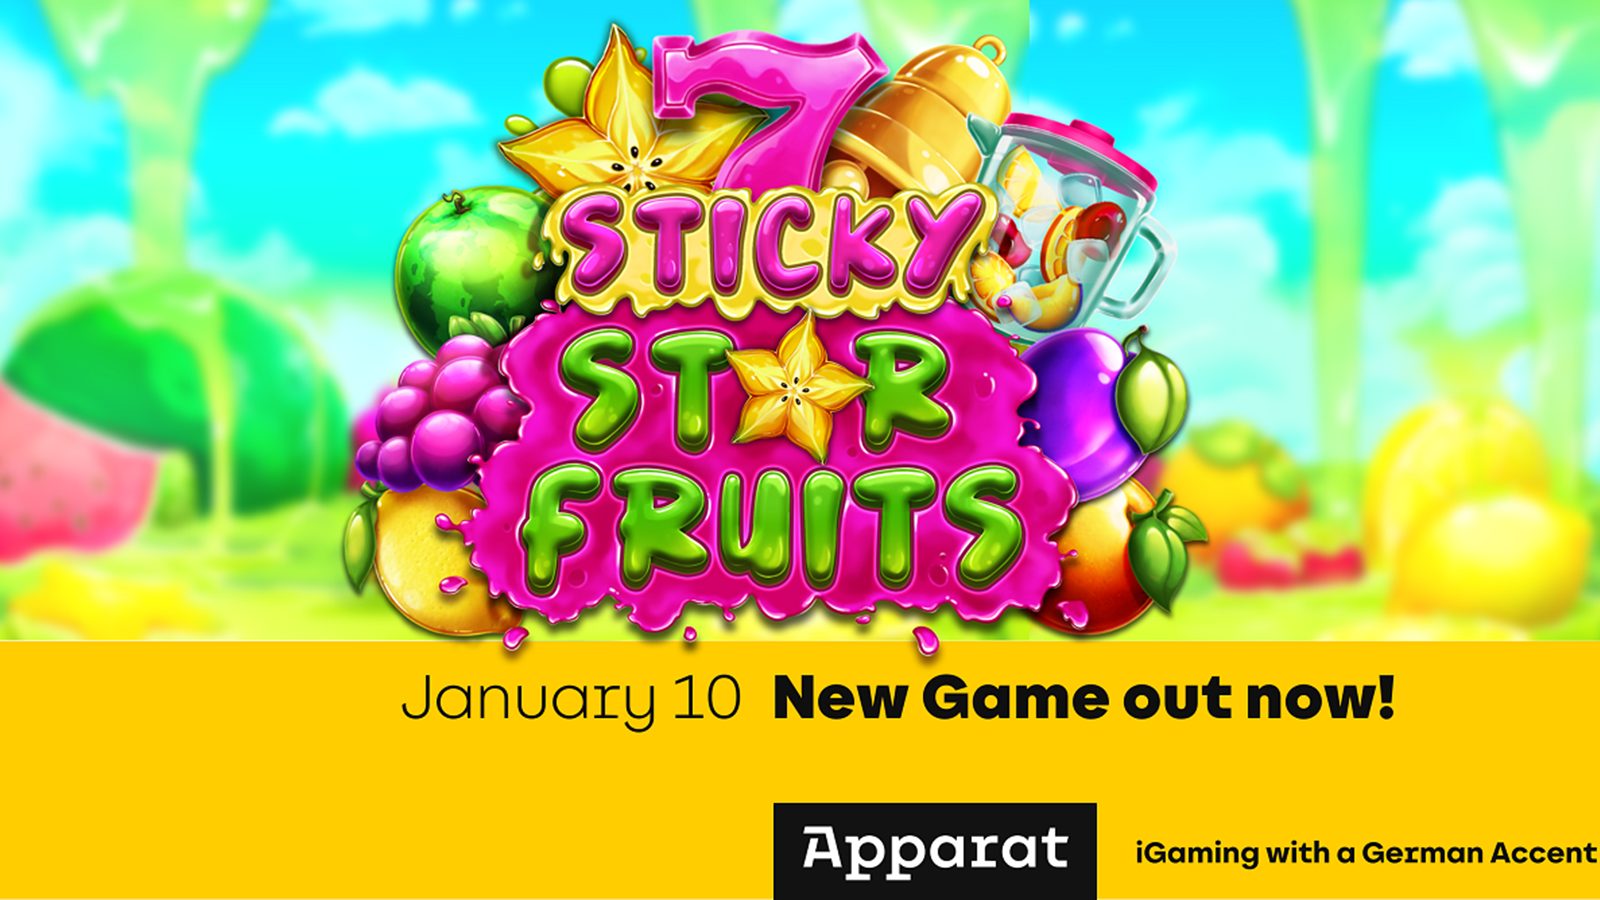 Apparat Gaming's Sticky Star Fruits Slot